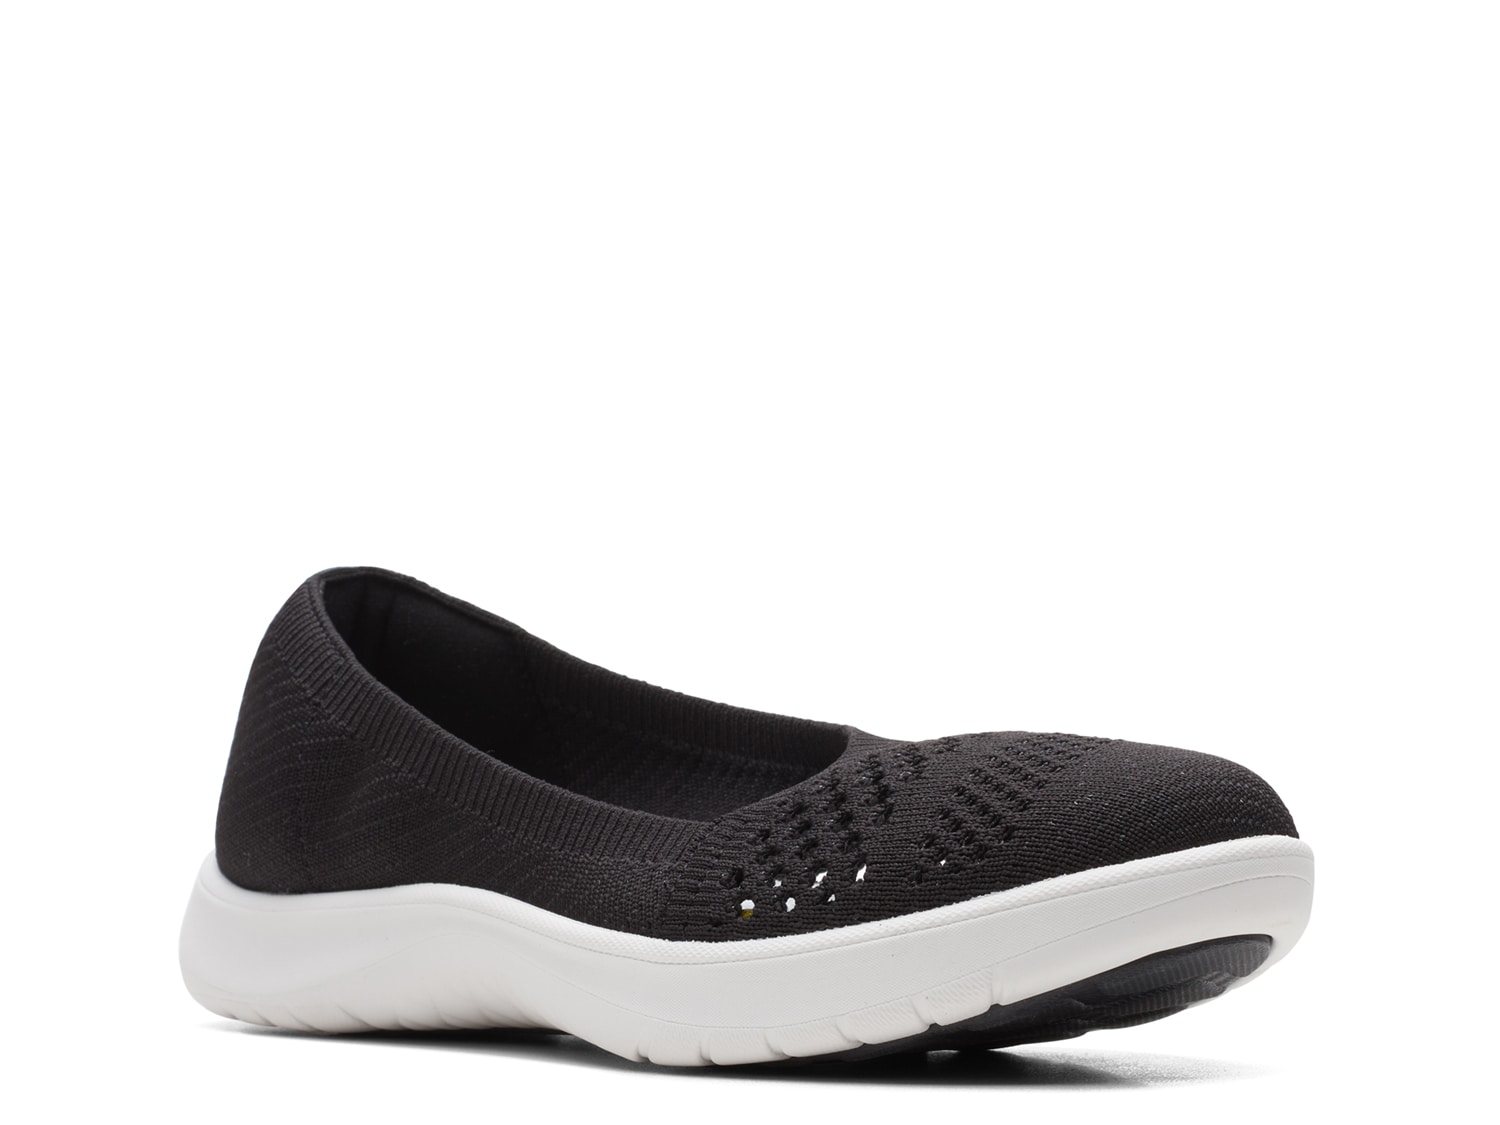 Clarks Cloudsteppers Adella Moon Slip-On - Free Shipping | DSW